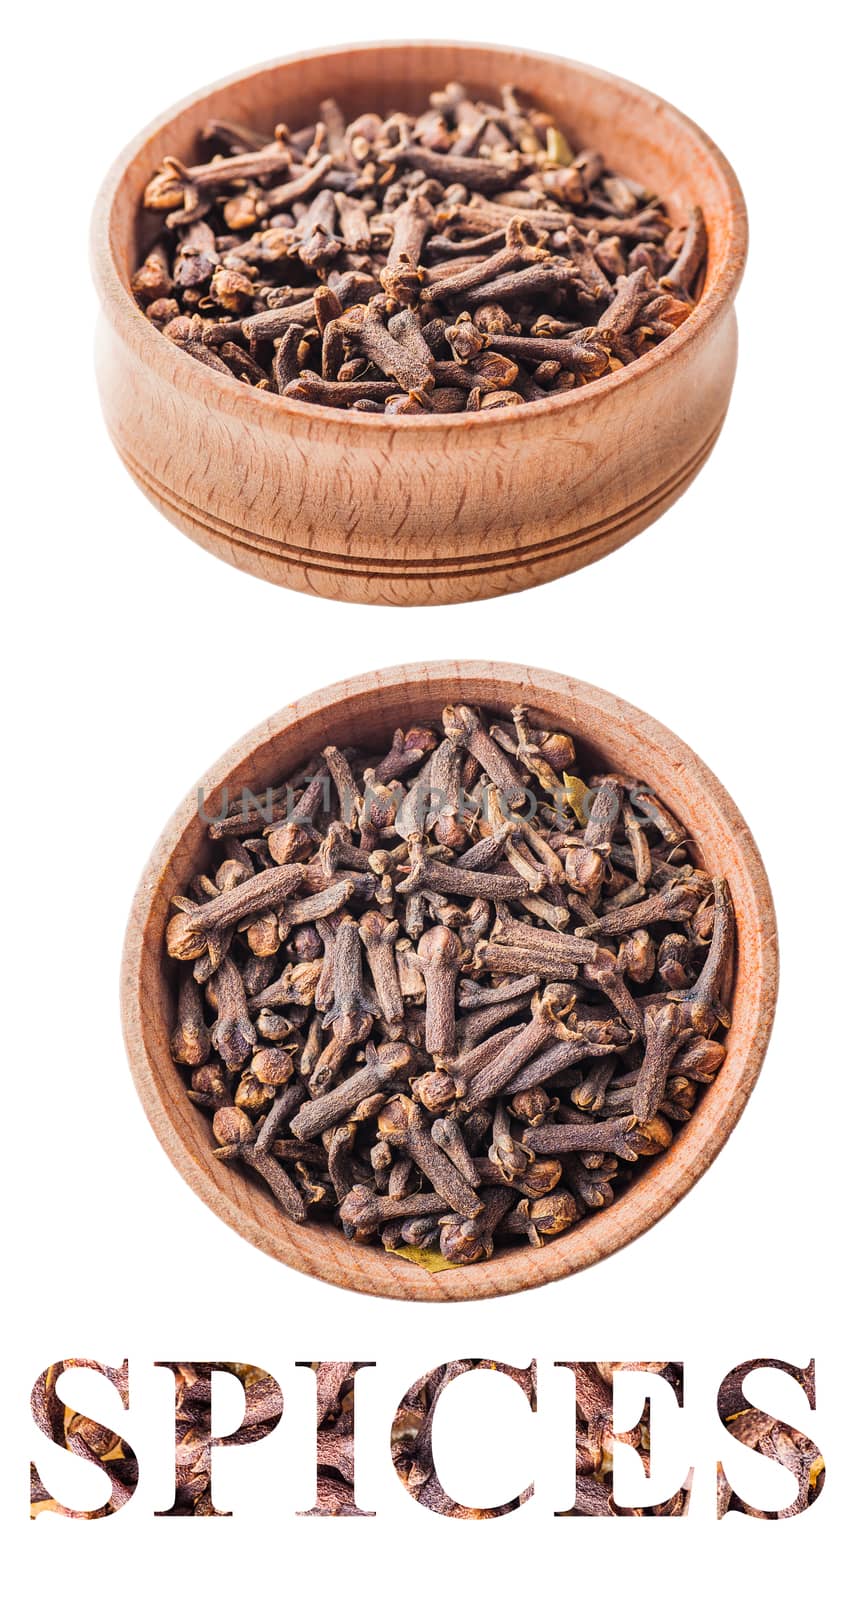 cloves in a wooden bowl isolated on white background